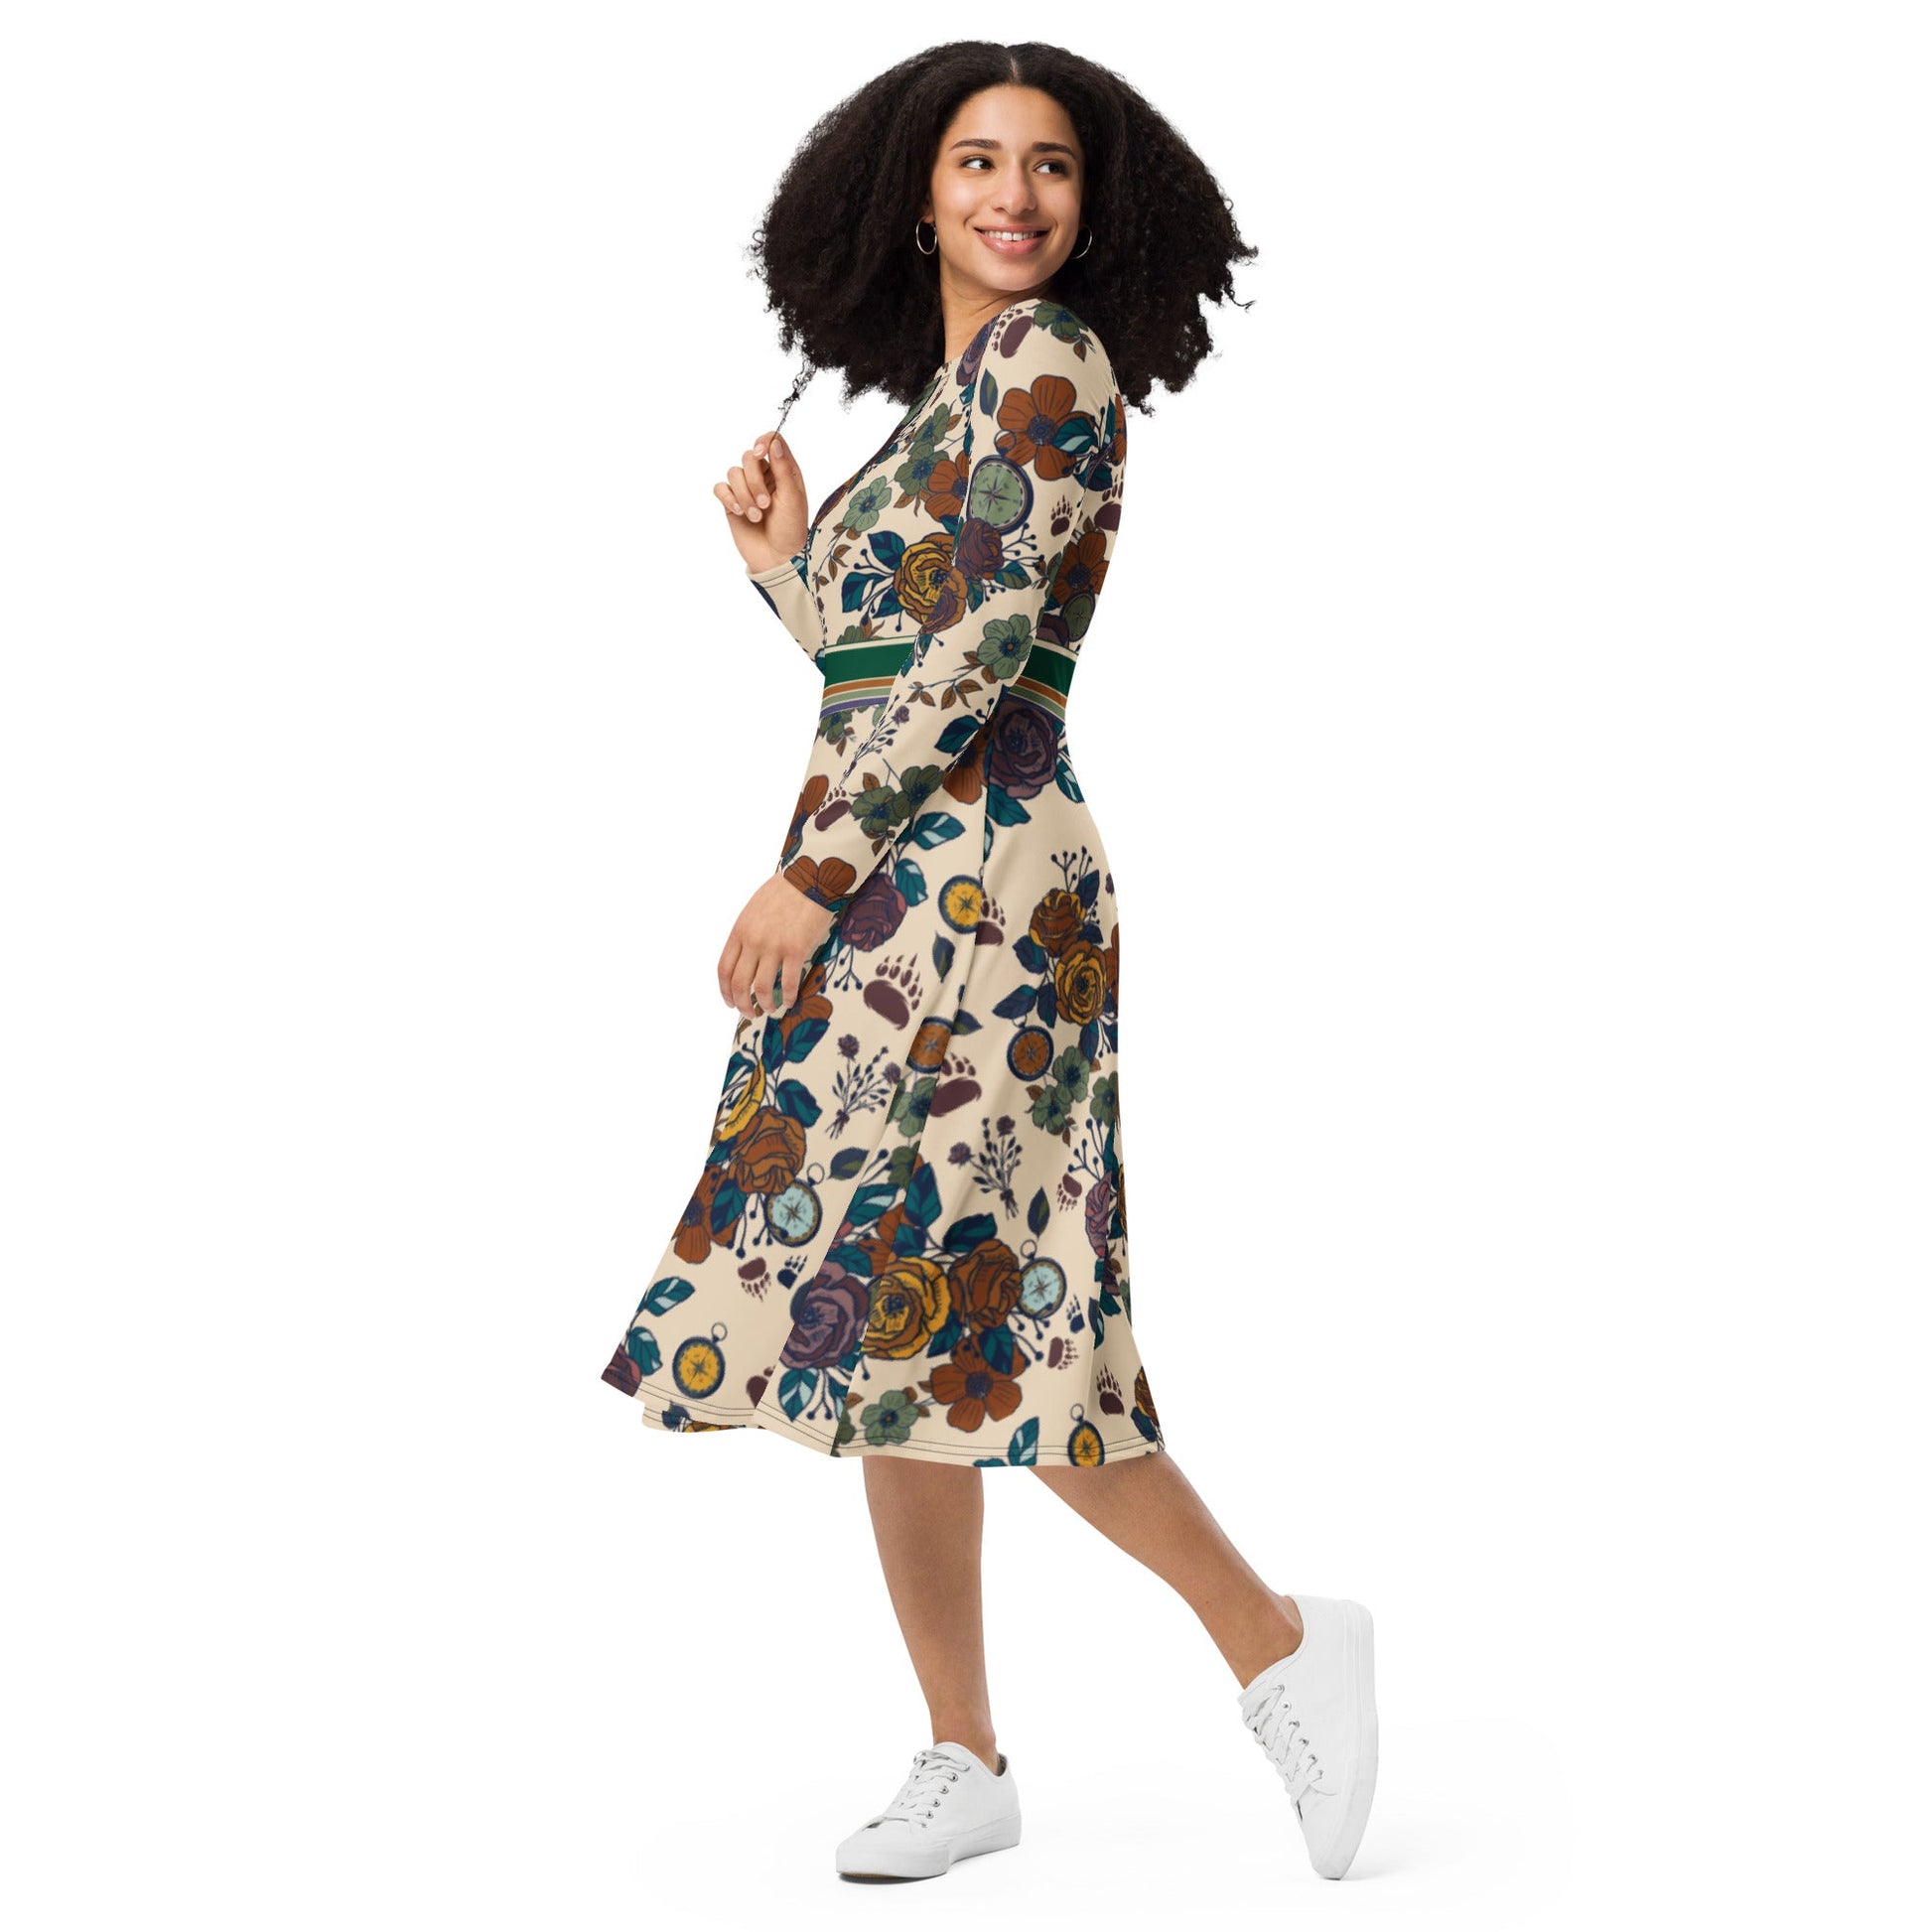 Retro Compass Floral Long Sleeve Adventure Dress with Pockets - Appalachian Bittersweet -